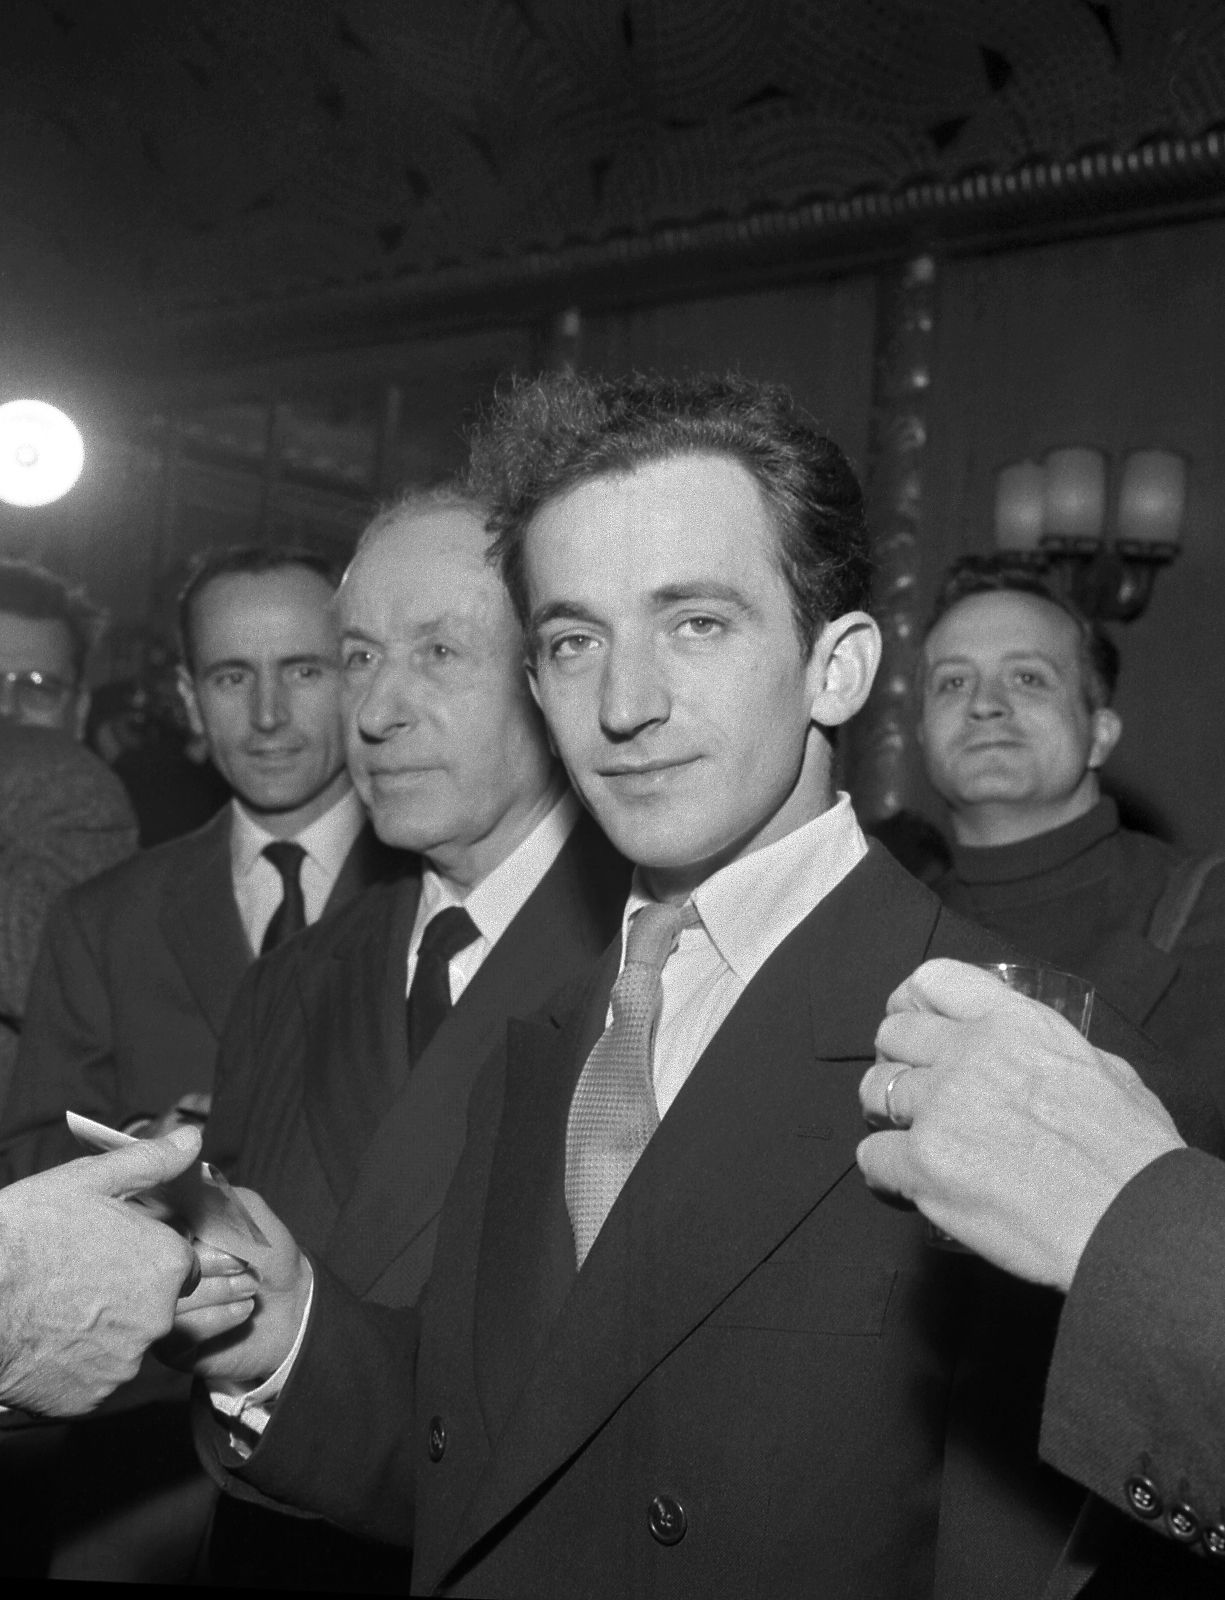 André Schwarz-Bart in 1959 Foto AFP (FILES) - Picture taken 07 December 1959 in Paris of French author Andre Schwarz-Bart surrounded by Goncourt academy members after receiving the Prix Goncourt for his novel "Le dernier des Justes". Andre Schwarz-Bart died 30 Septembre 2006 in Pointe-à-Pitre, in the French Overseas, following a heart operation aged 78. Born in the northeastern French town of Metz in 1928, the writer of Polish Jewish ancestry came to live in the French Overseas Department of Guadeloupe in the 1970s. The novel that won him the prestigious prize at the age of 31 was a literary transposition of the Holocaust tracing the destiny of a Jewish family from the first crusade to Auschwitz. AFP PHOTO FILES